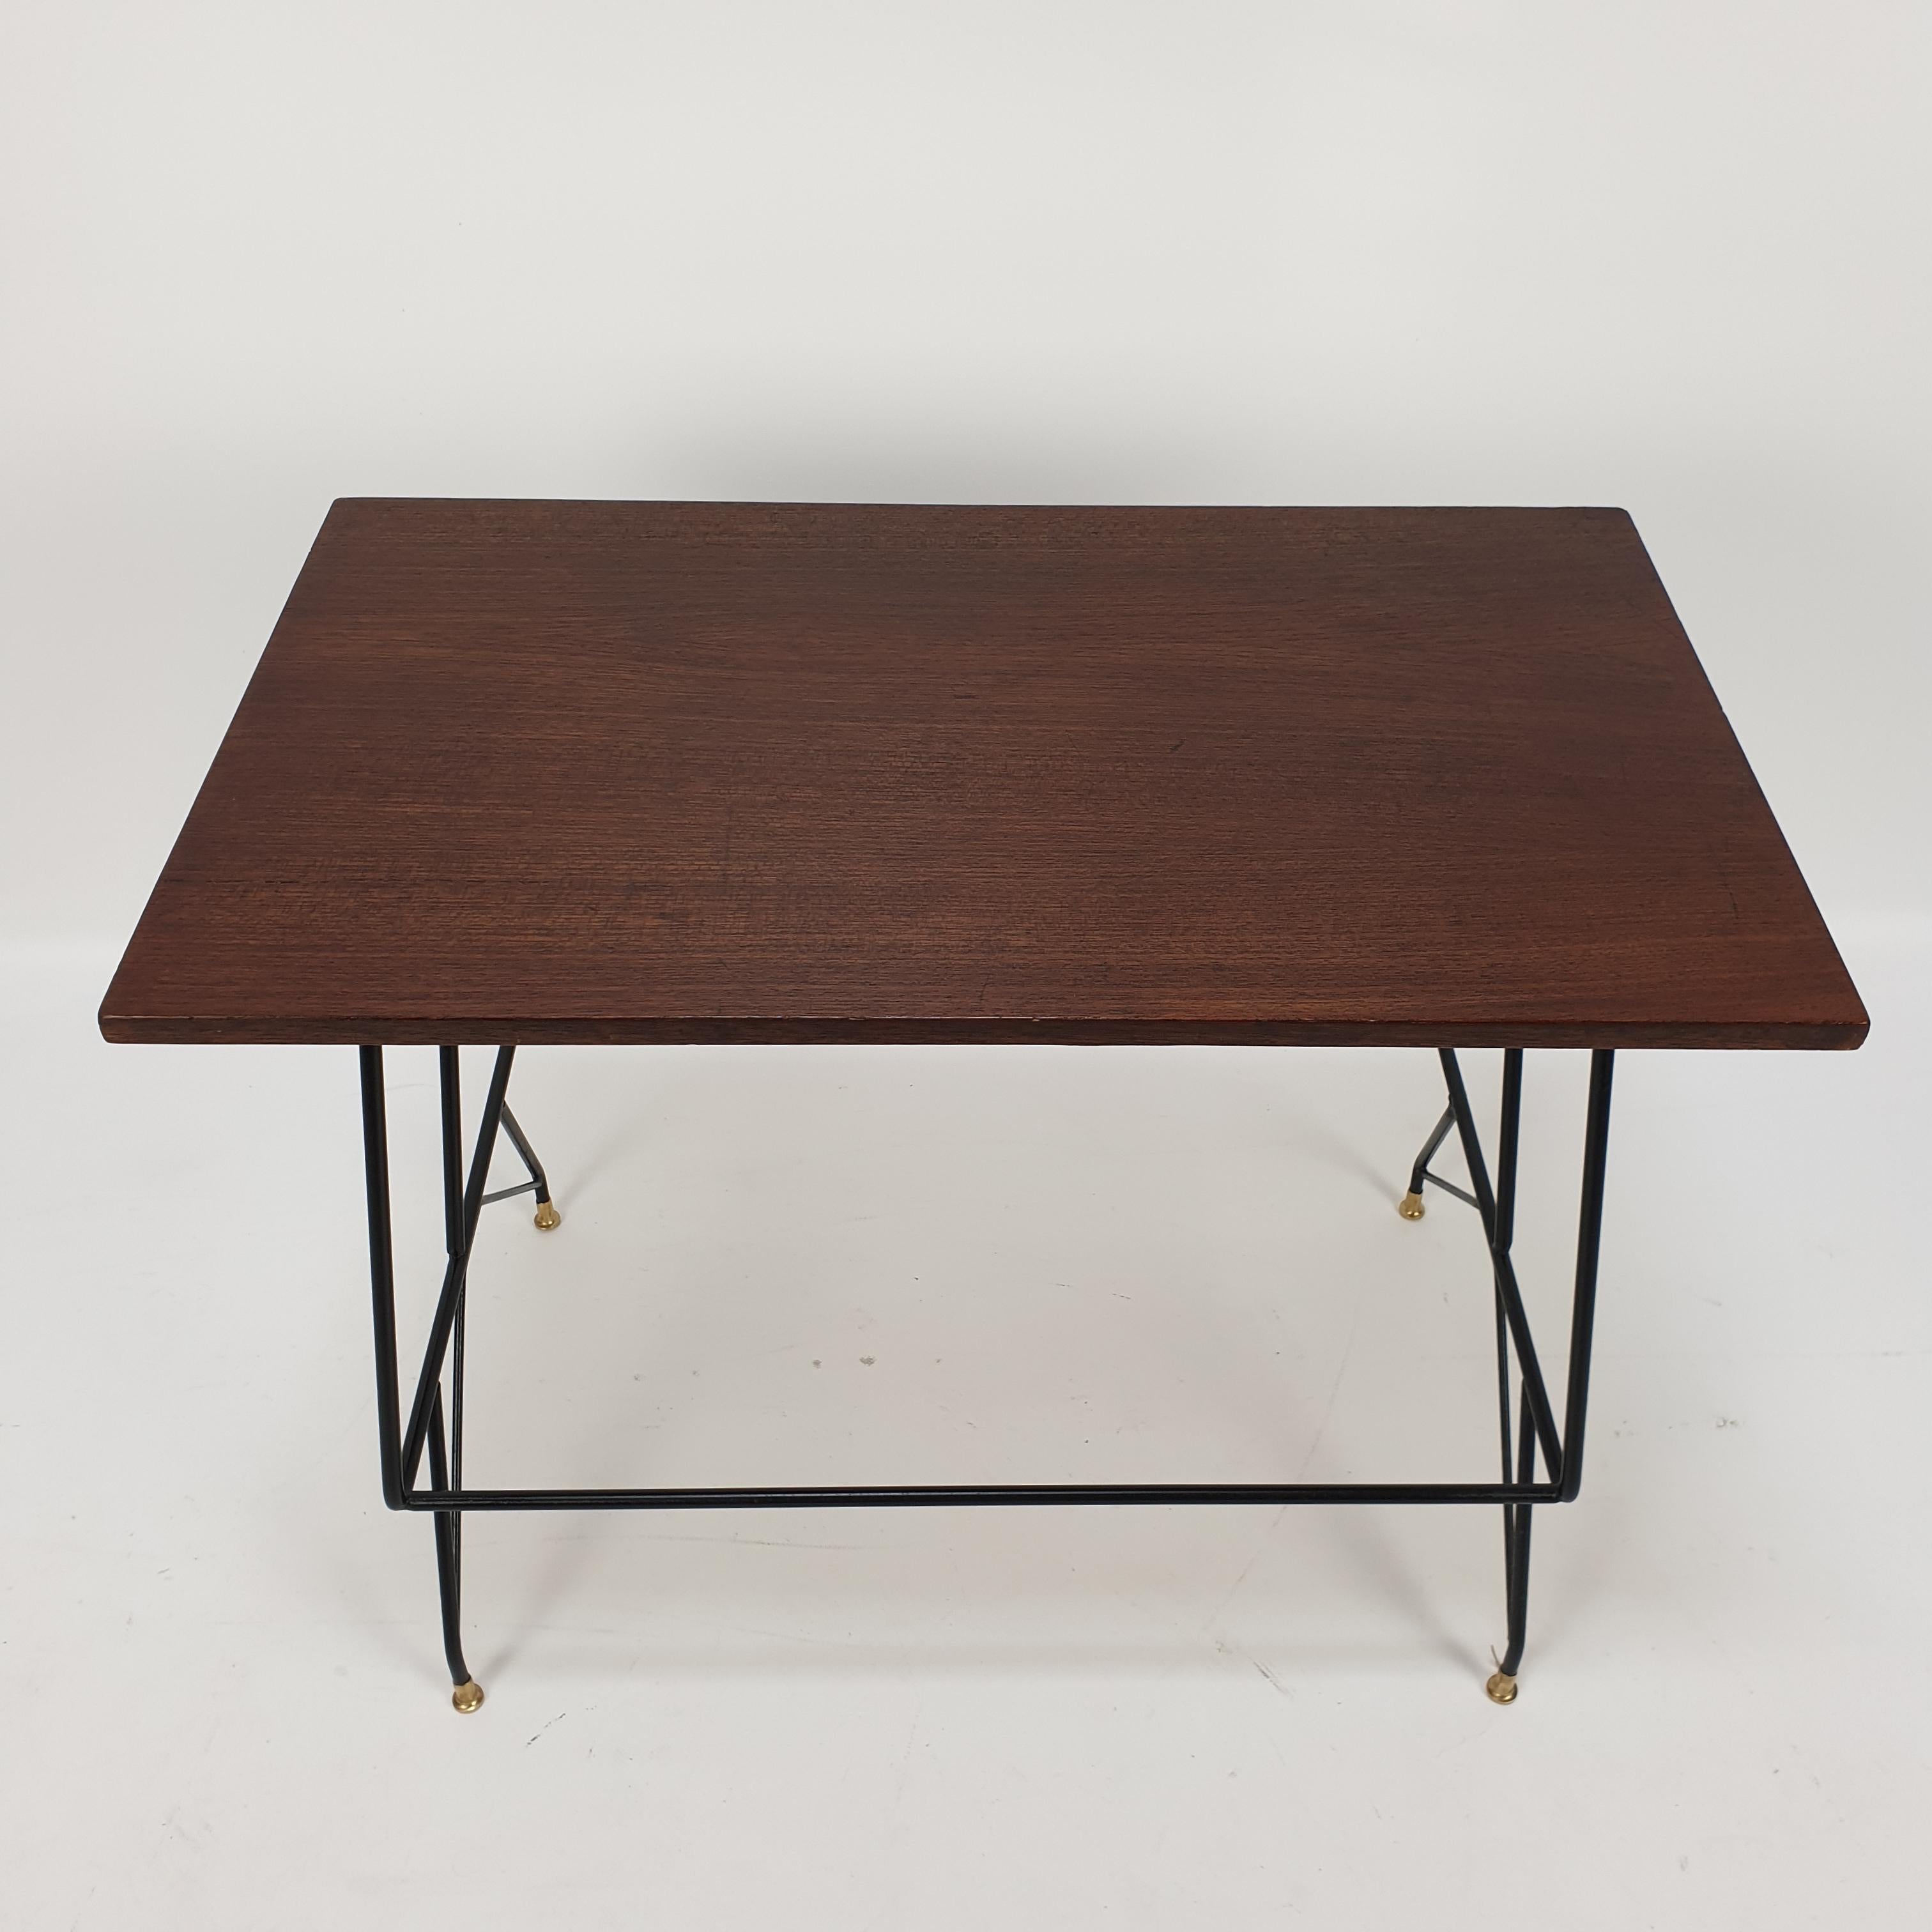 Mid-Century Modern Italian Coffee Table from Mobili Pizzetti, 1950s For Sale